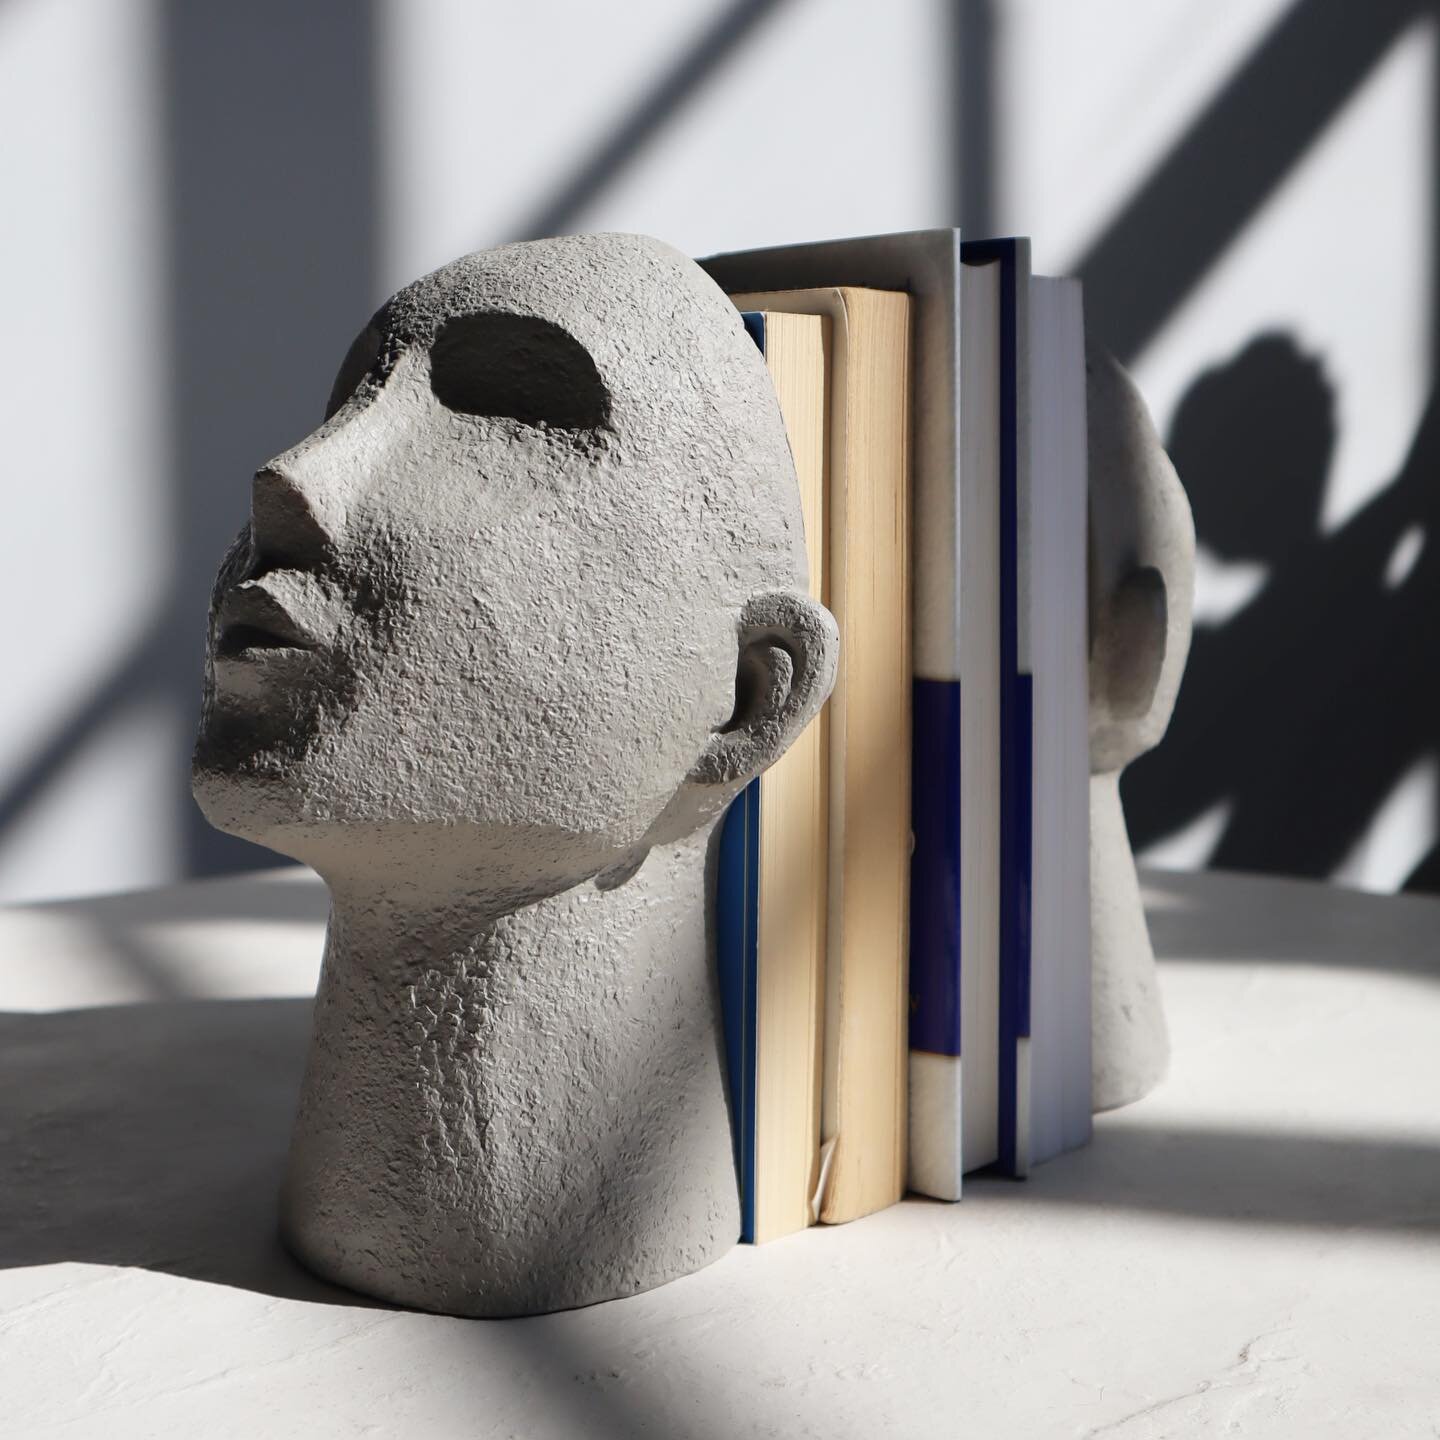 &ldquo;Two heads are better than one.&rdquo;

The Abstract Resin Face Bookends  speaks for itself&hellip;well sorta. This set of 2 bookends is an amazing decorative and functional accessory for any table, shelf, desk, or counter; their unusual yet mi